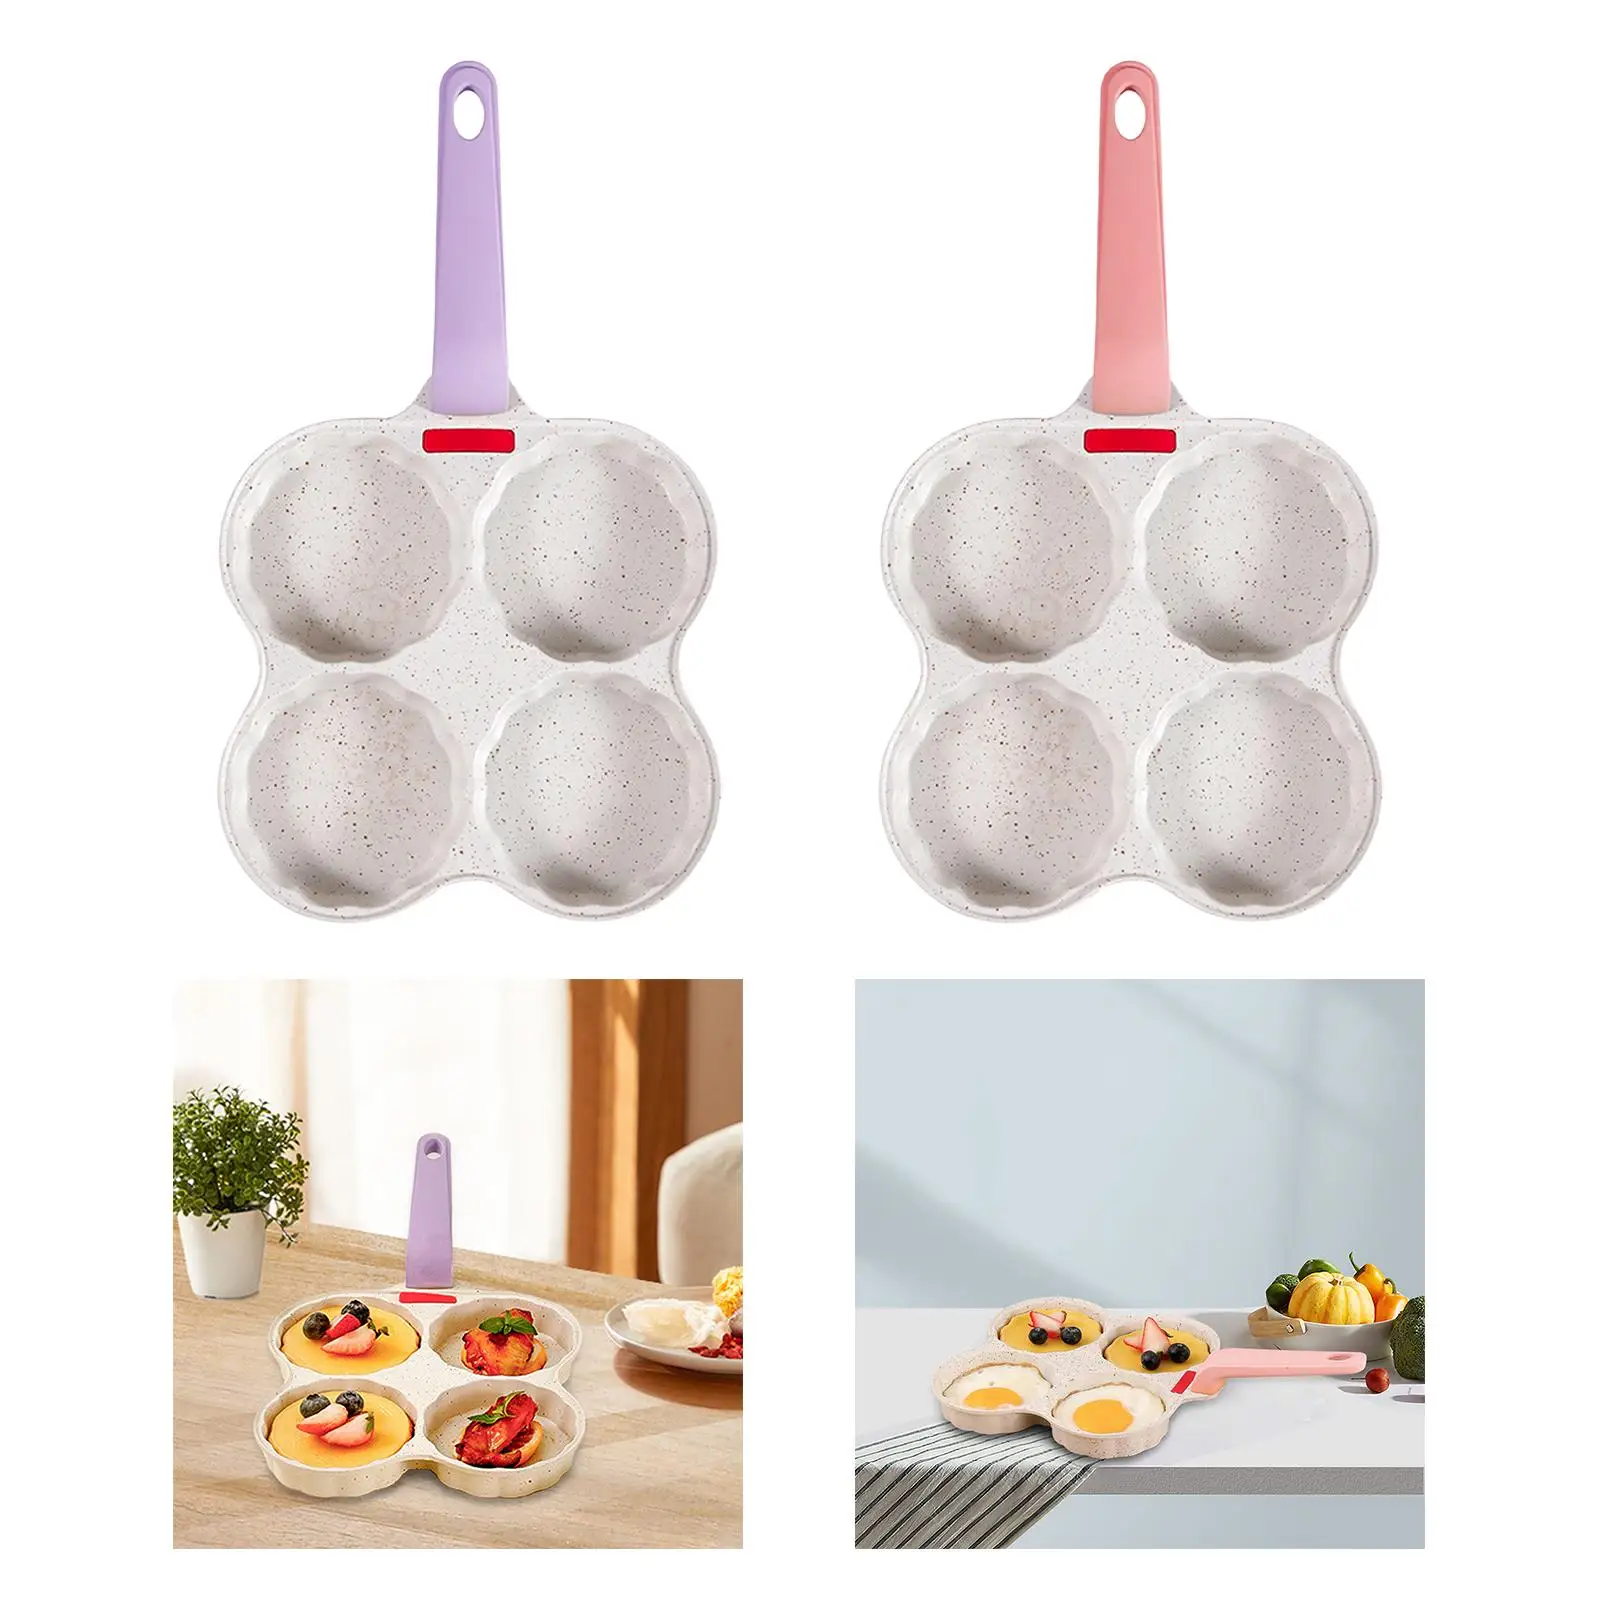 Egg Frying Pan Nonstick 4 Section Pancake Maker Fried Egg Cooker Crepe Pan Gas Stove Induction Cookware Kitchen Supplies